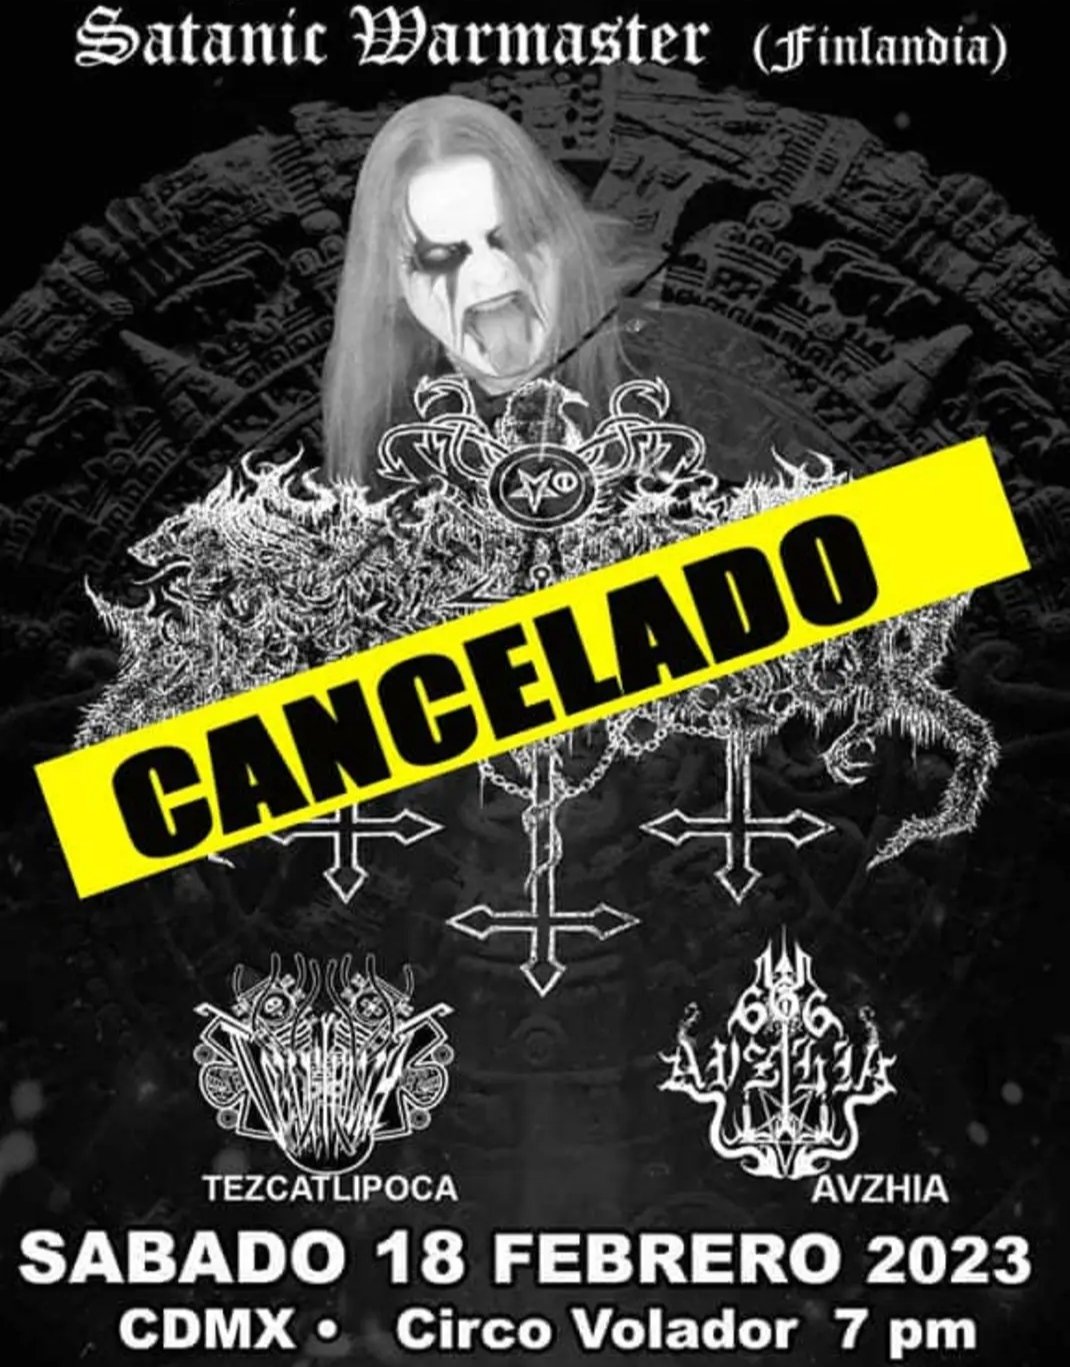 The Satanic Warmaster concert, a black metal band, was canceled in CDMX.  (@satanicwarmaster)